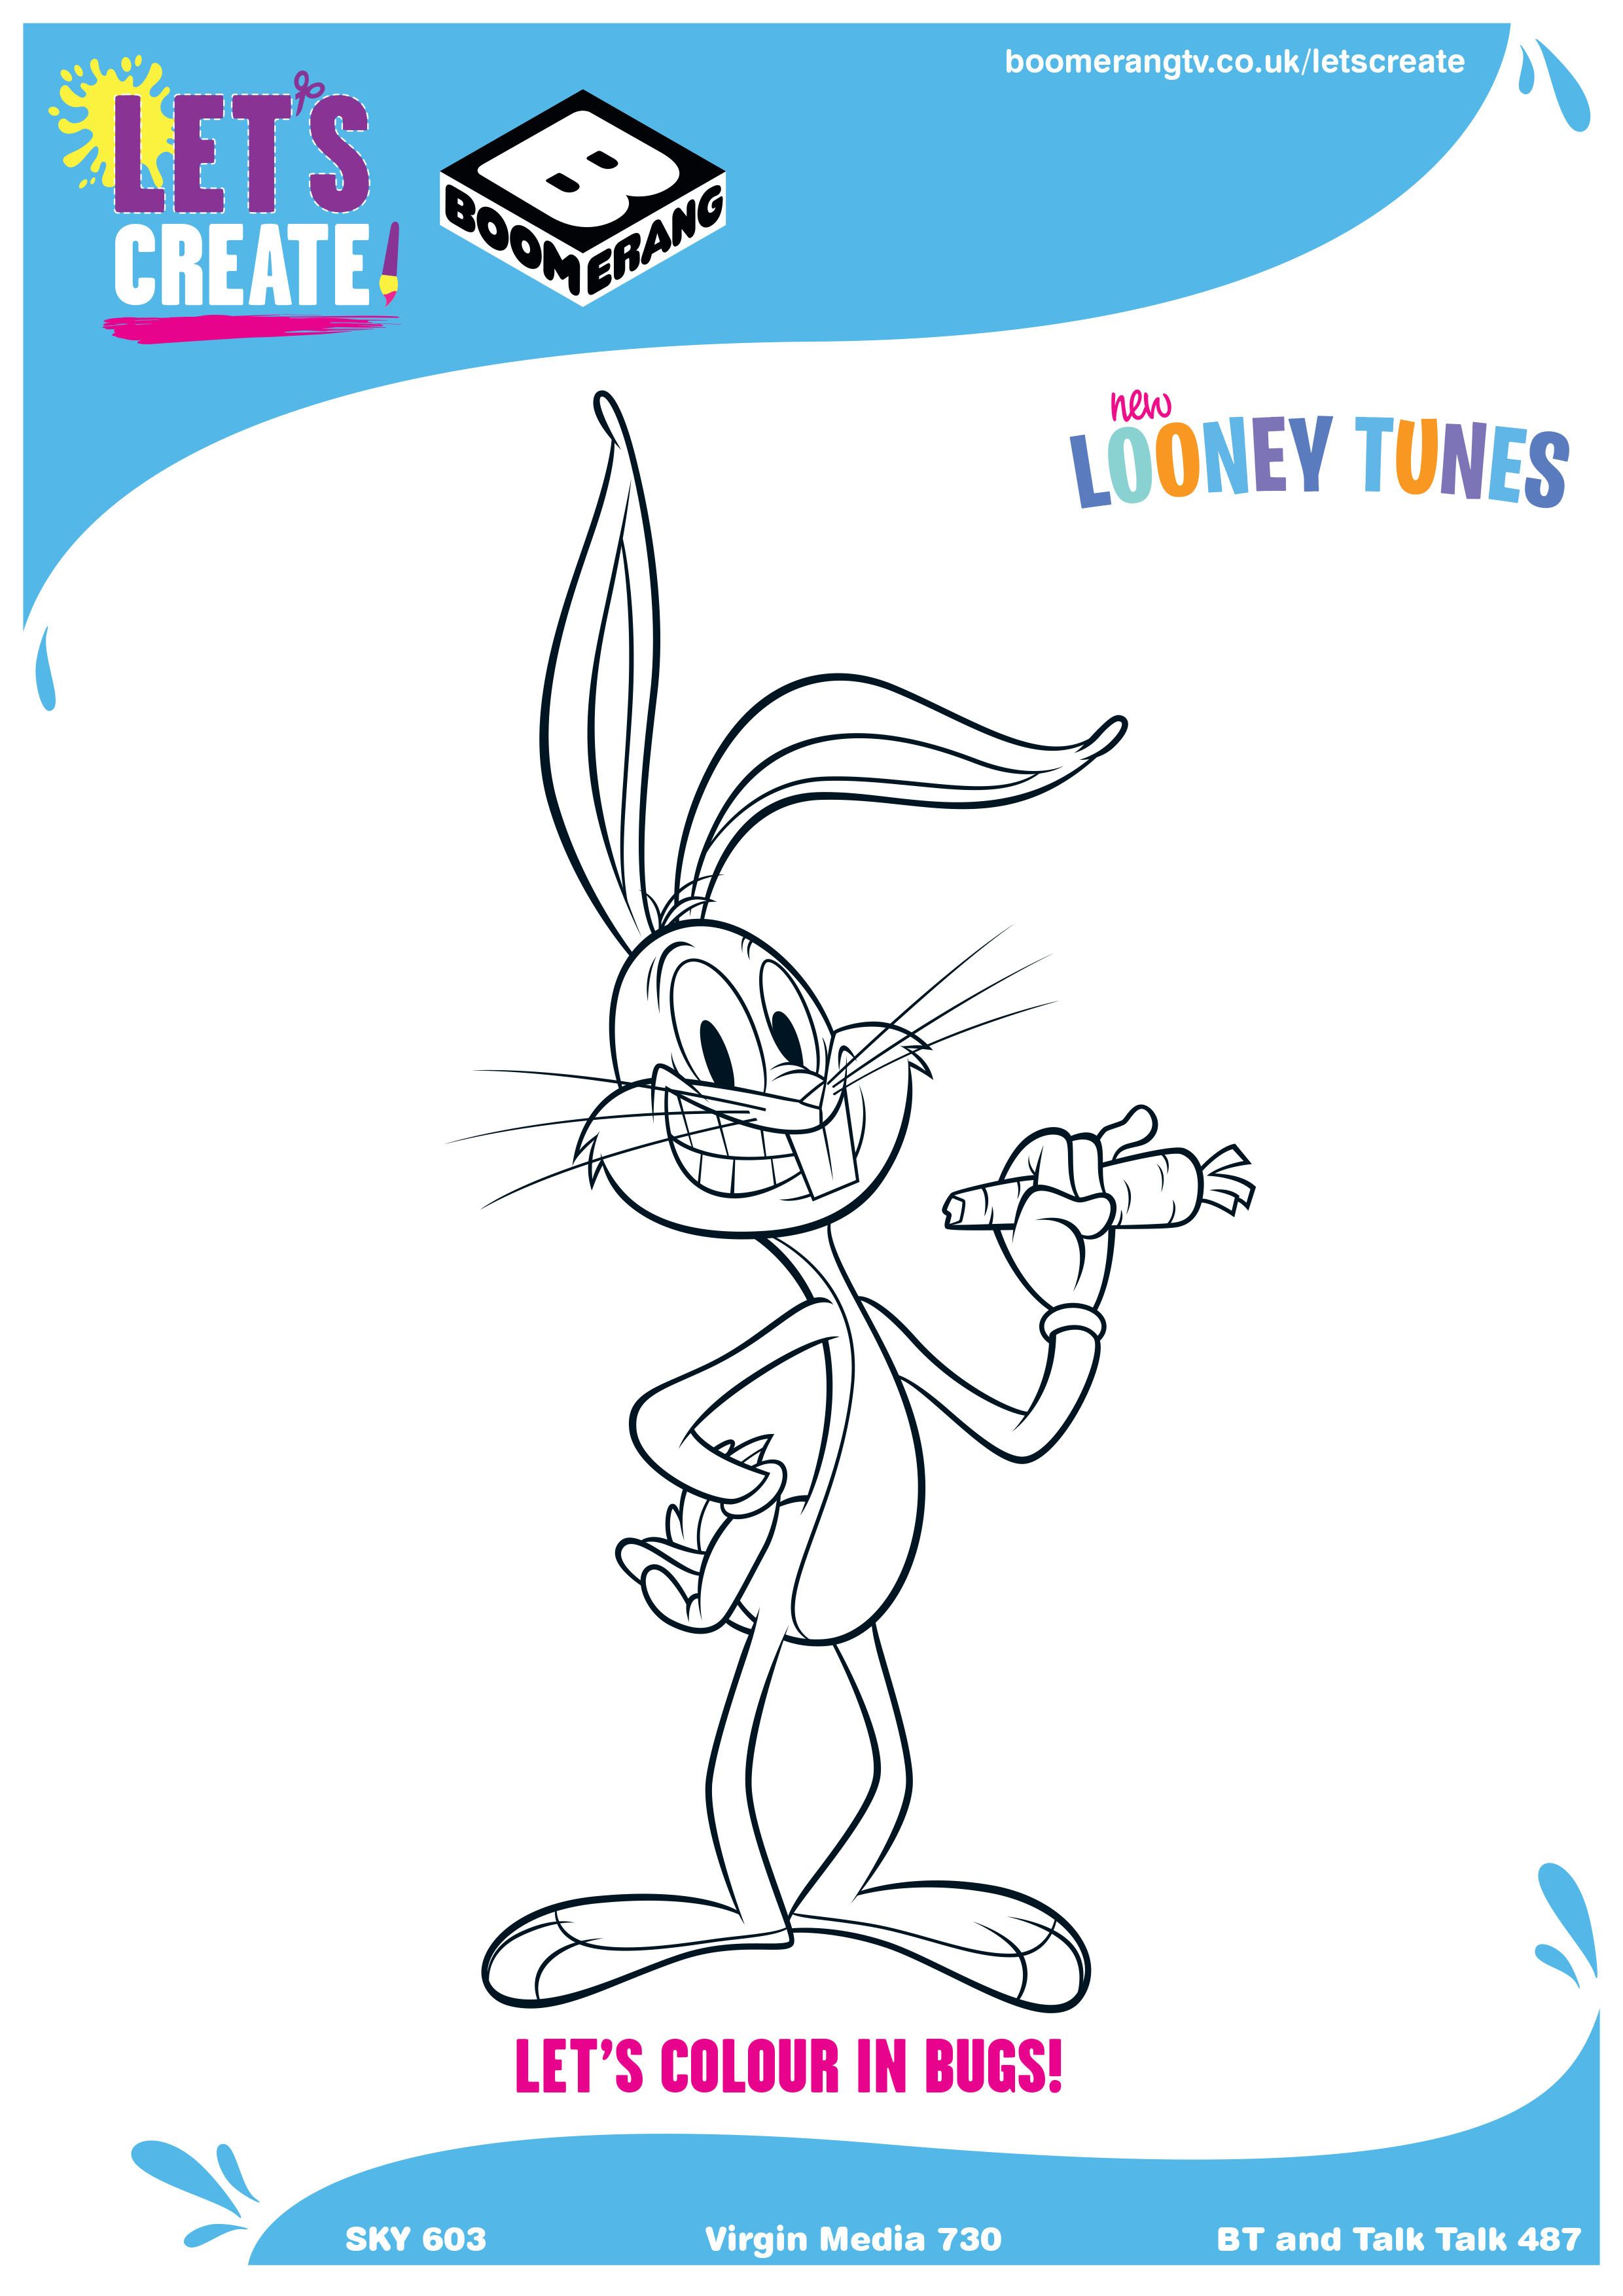 Louring bugs the new looney tunes boomerang